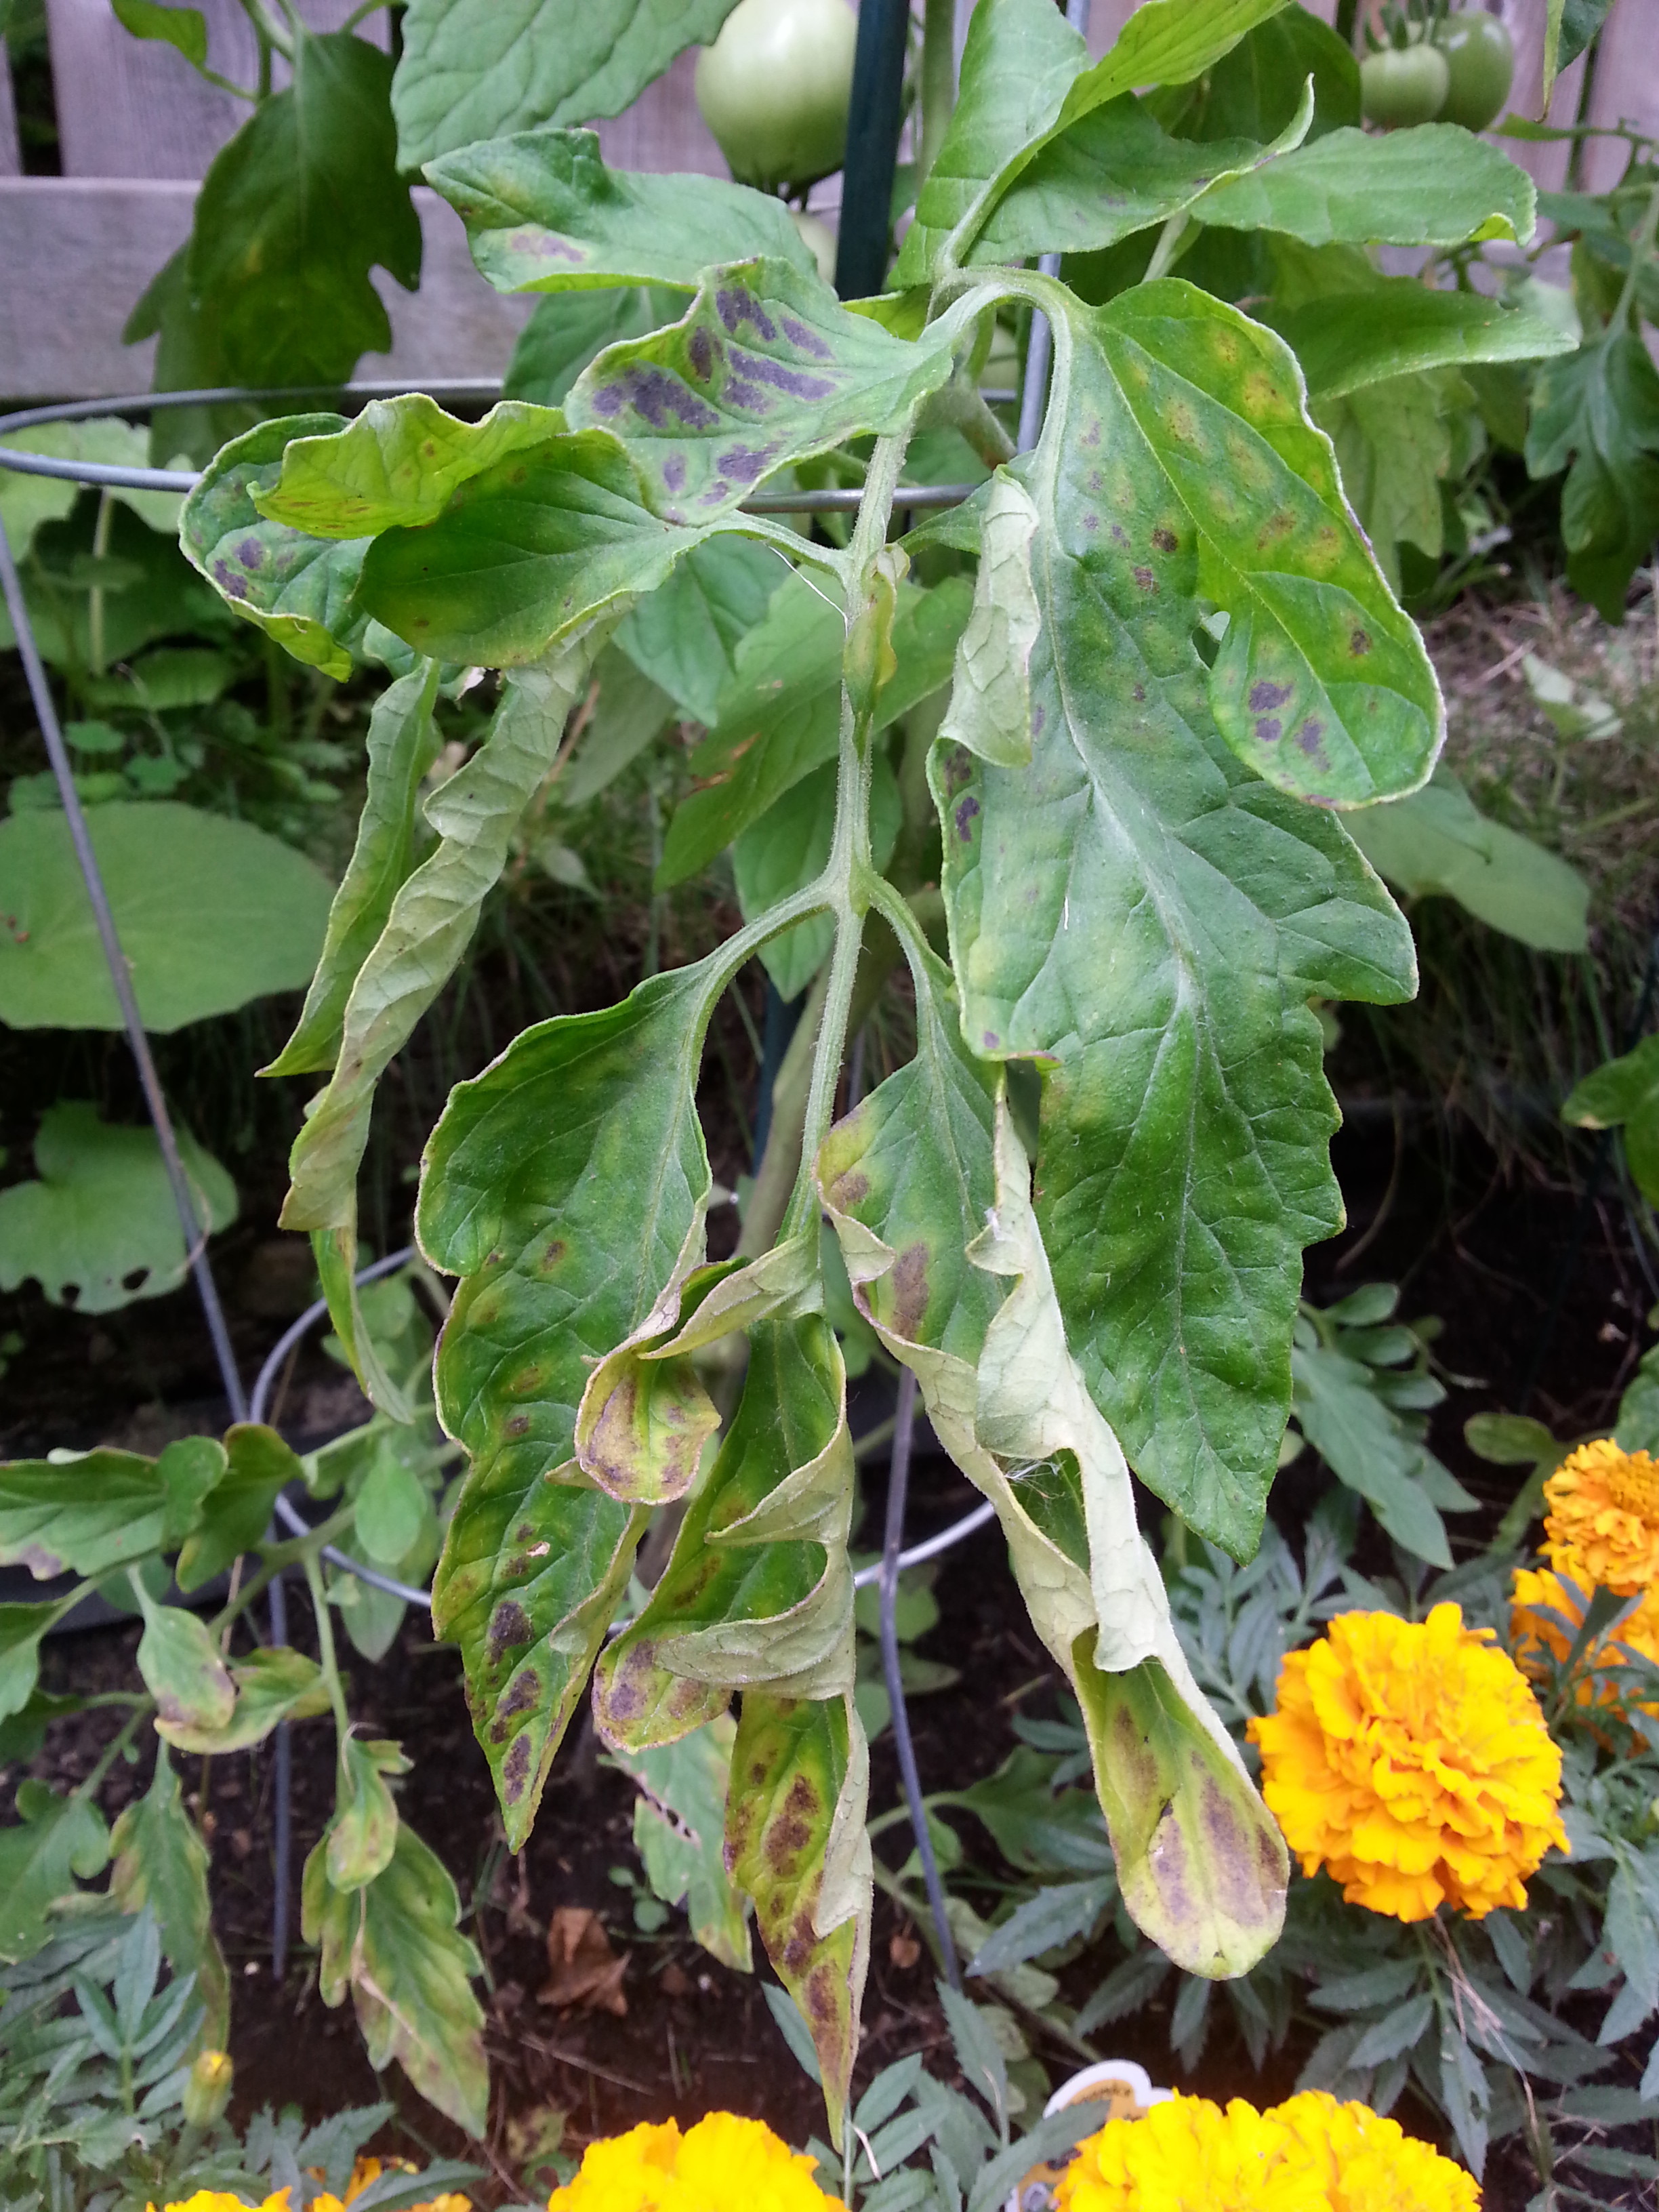 Wilted leaves on tomato plant with brown patches - Toronto Master ...